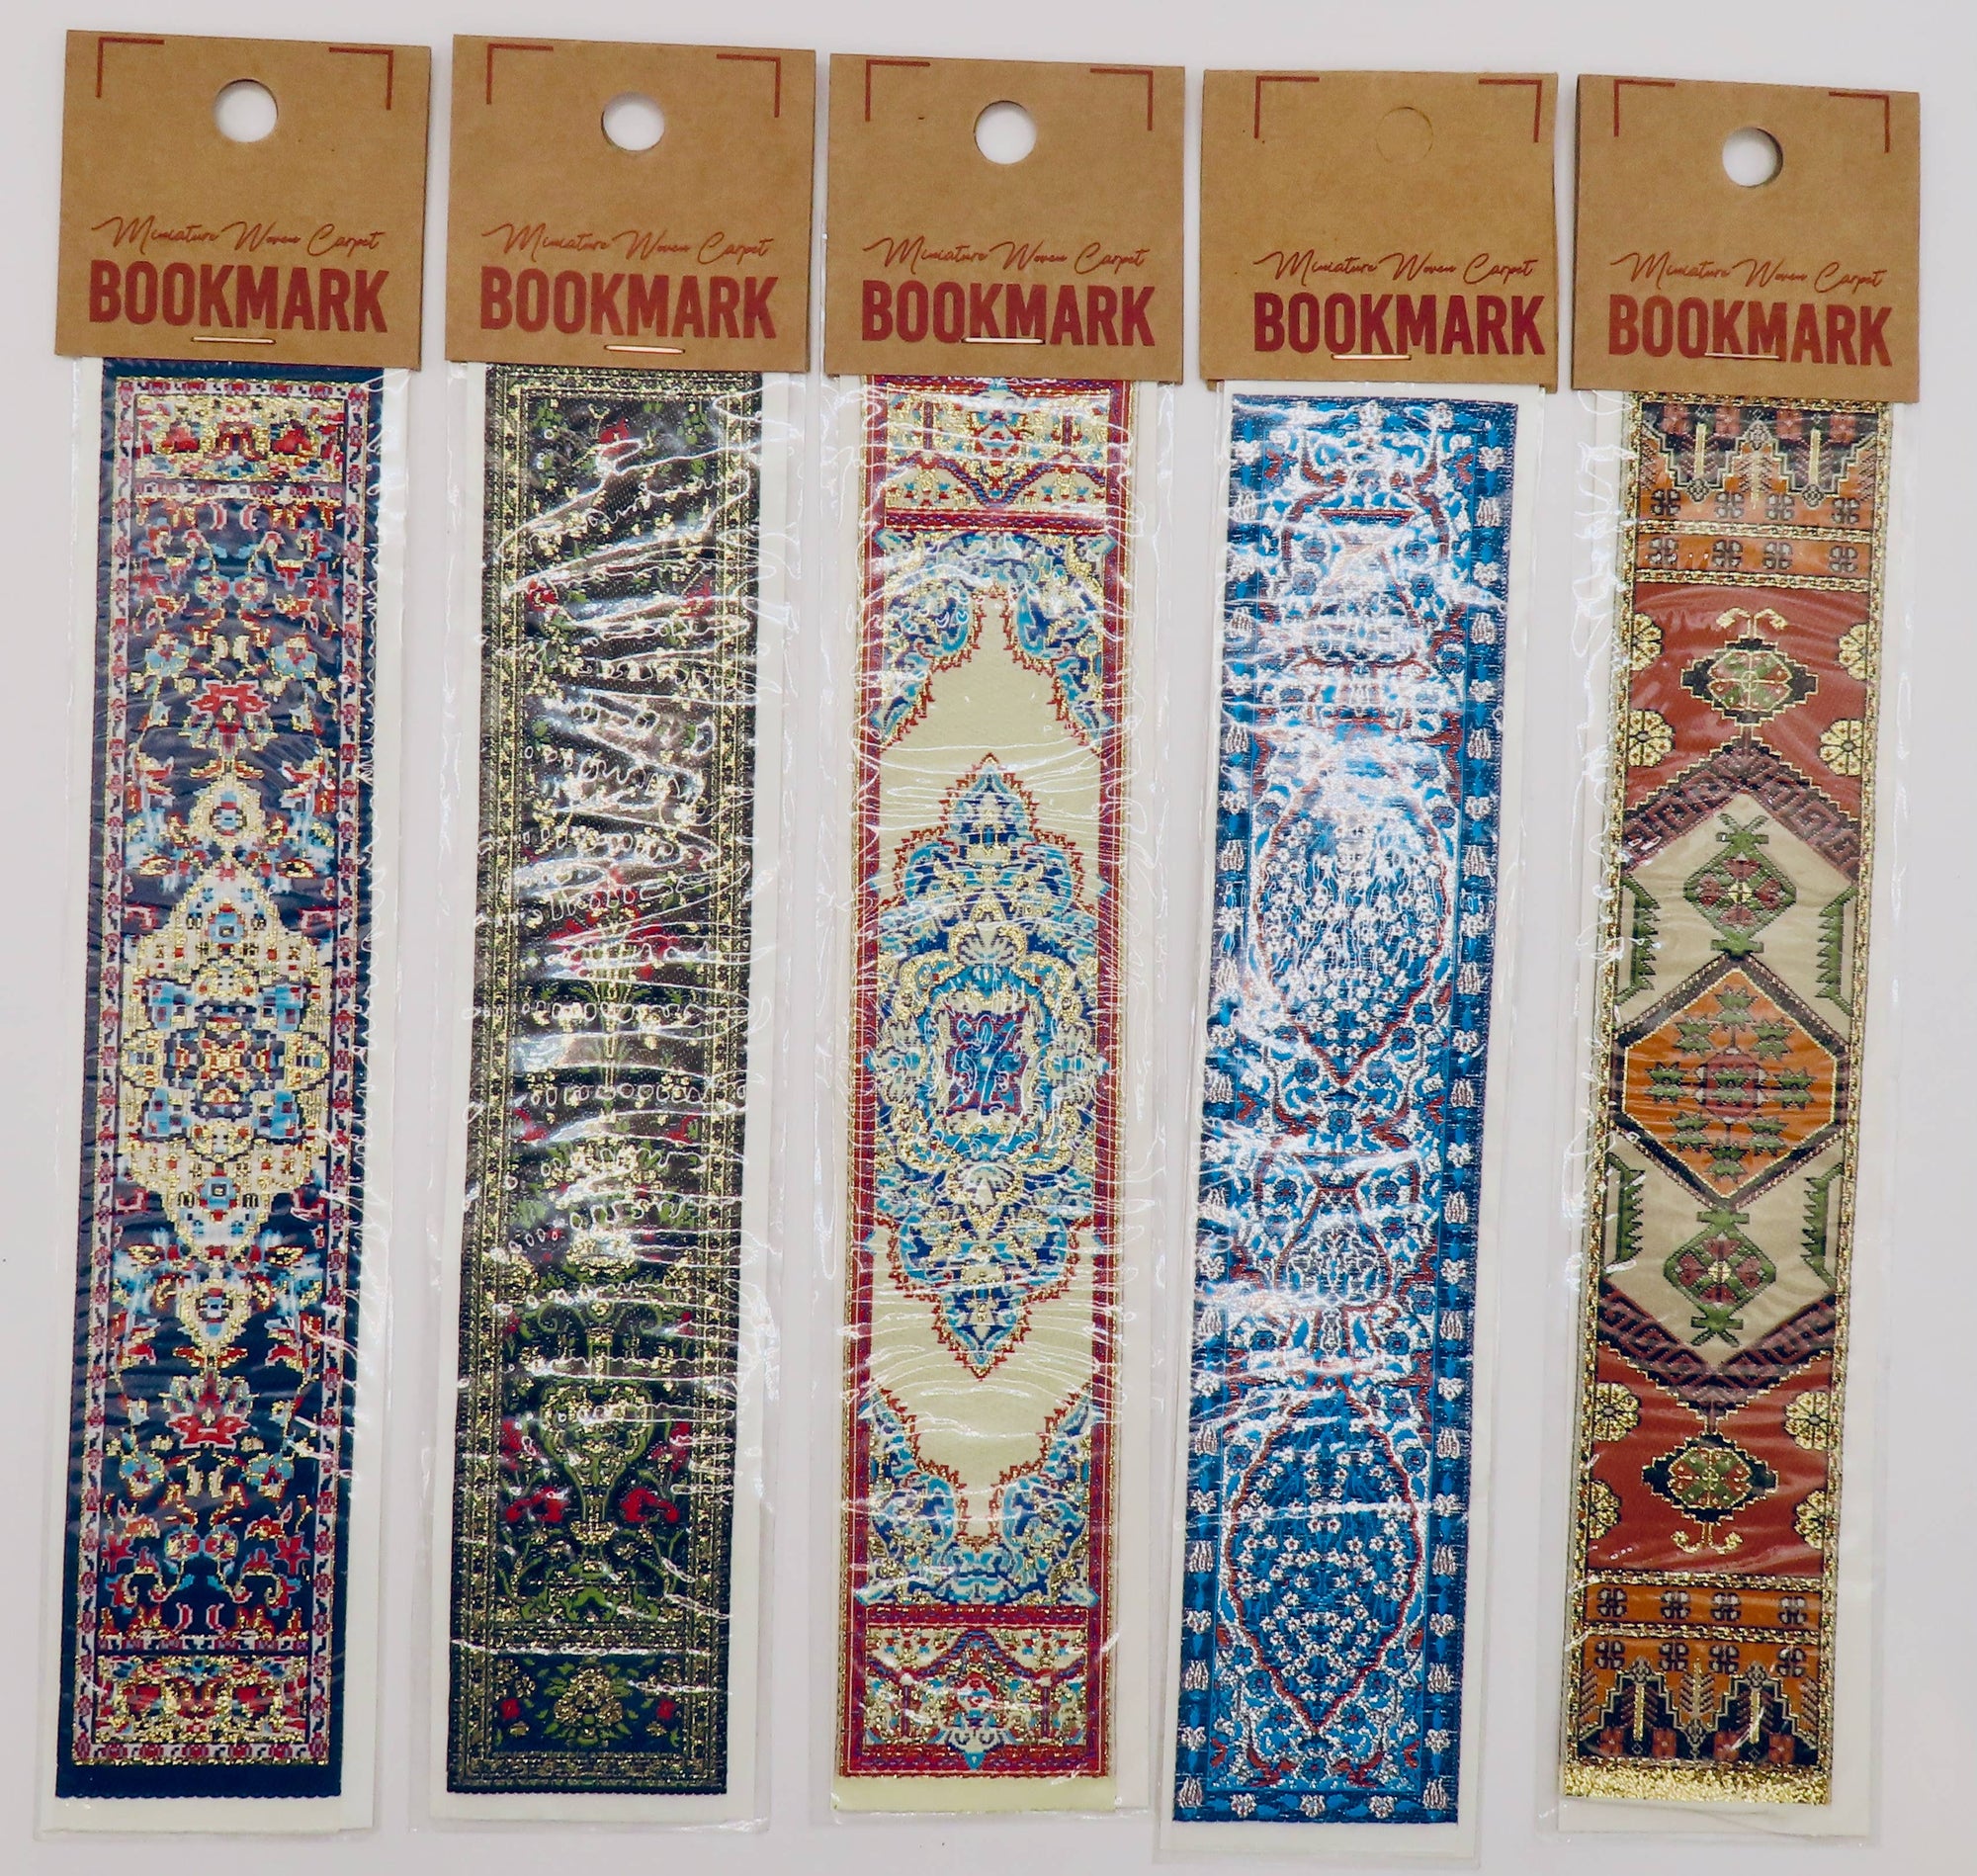 Five Turkish Bookmarks with intricate patterns, resembling Turkish carpets, displayed against a white background.